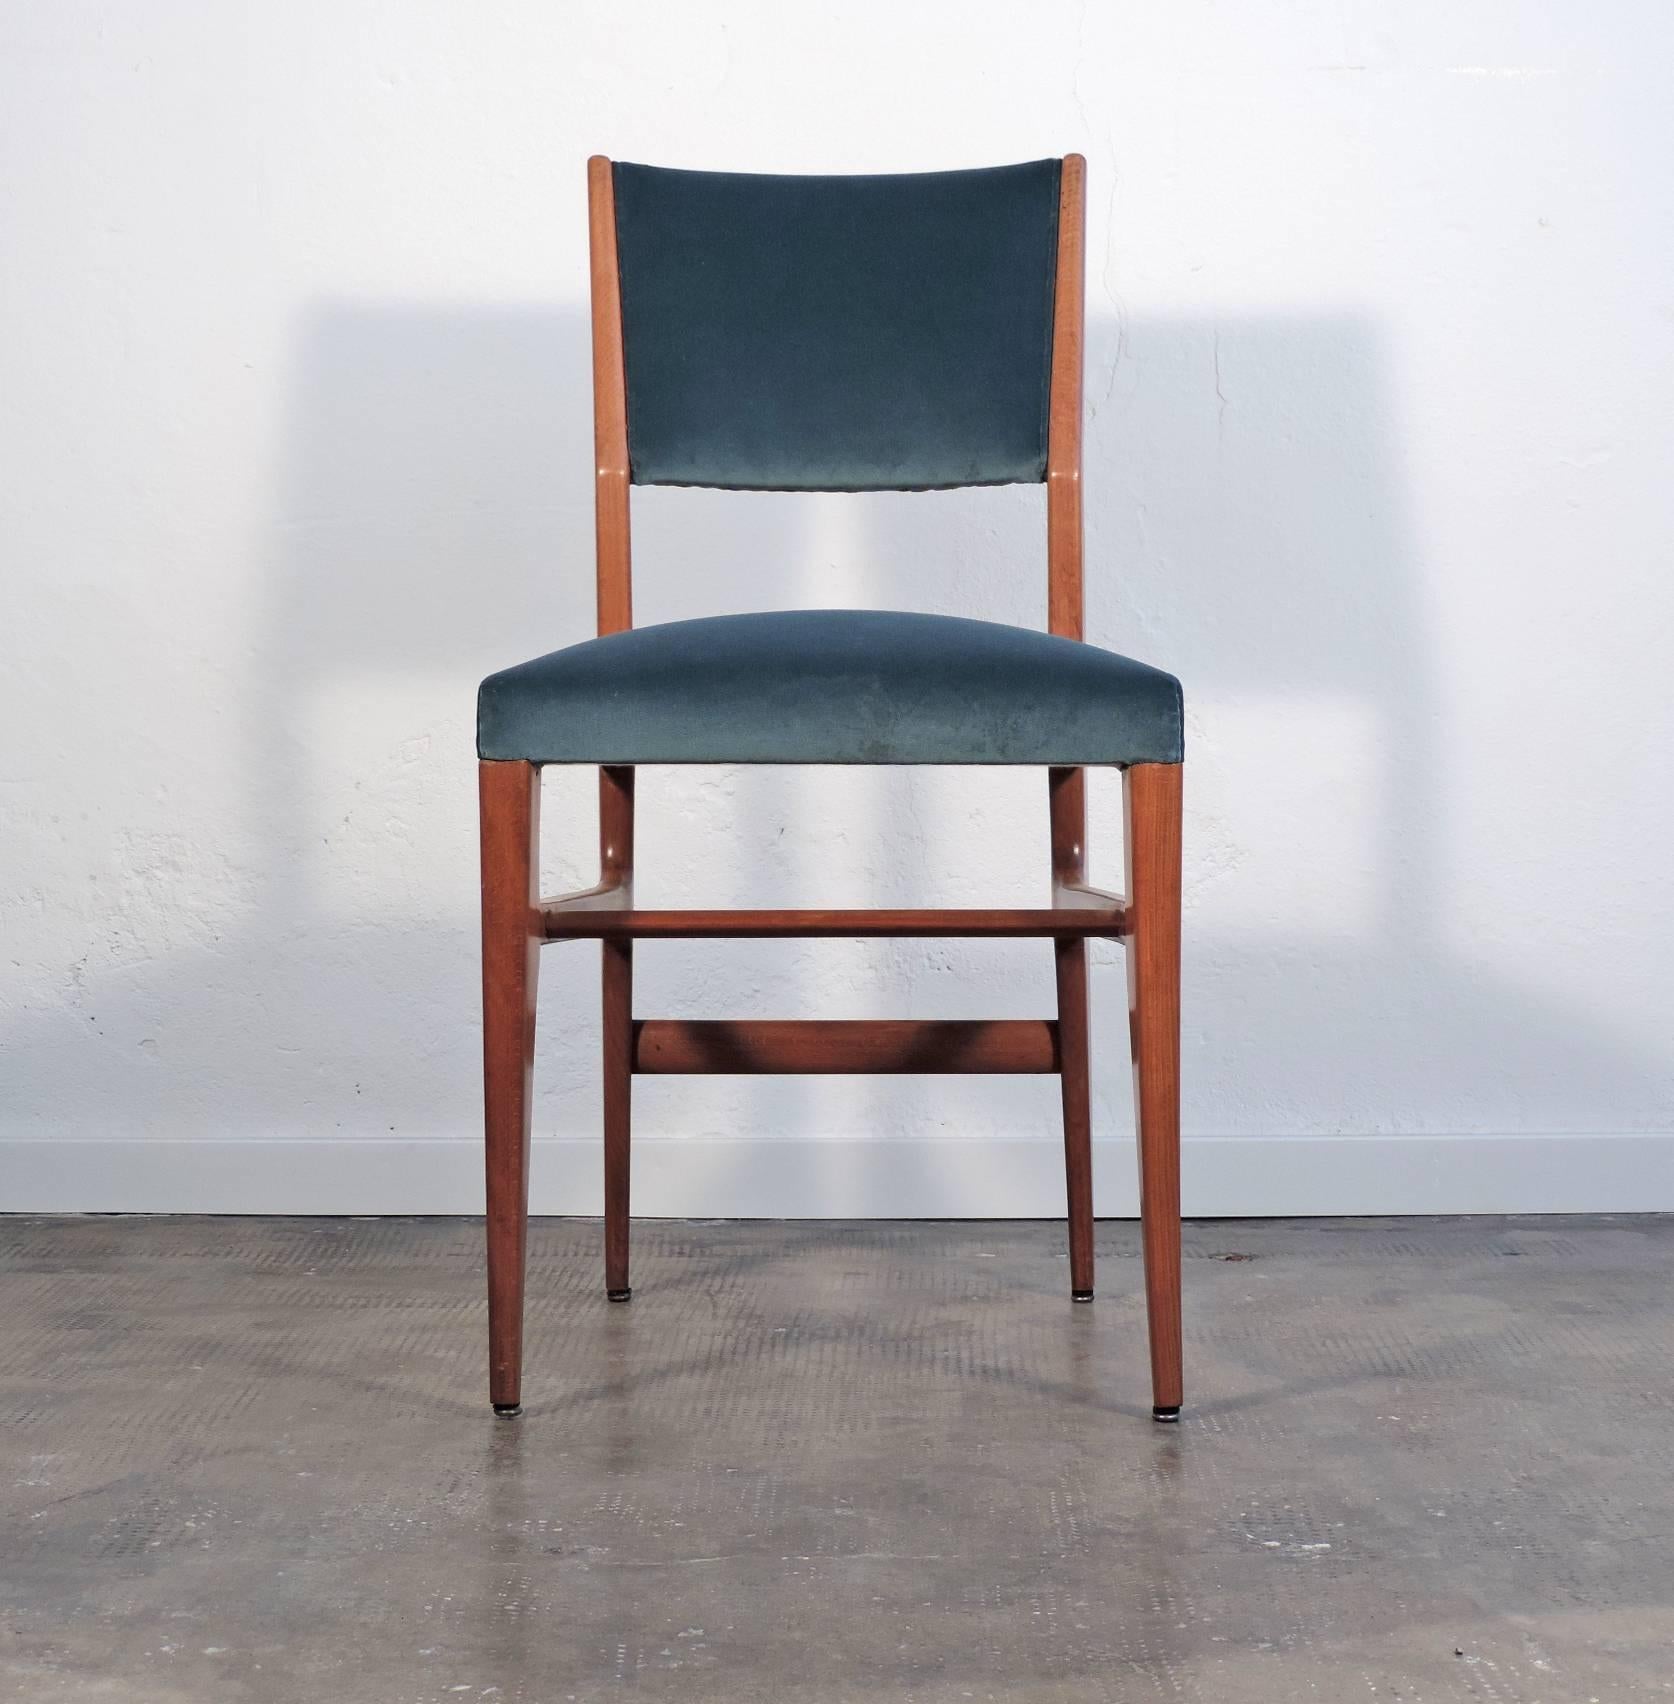 Splendid Gio Ponti pair of chairs for Cassina. Modell no. 111 Newly reupholstered.